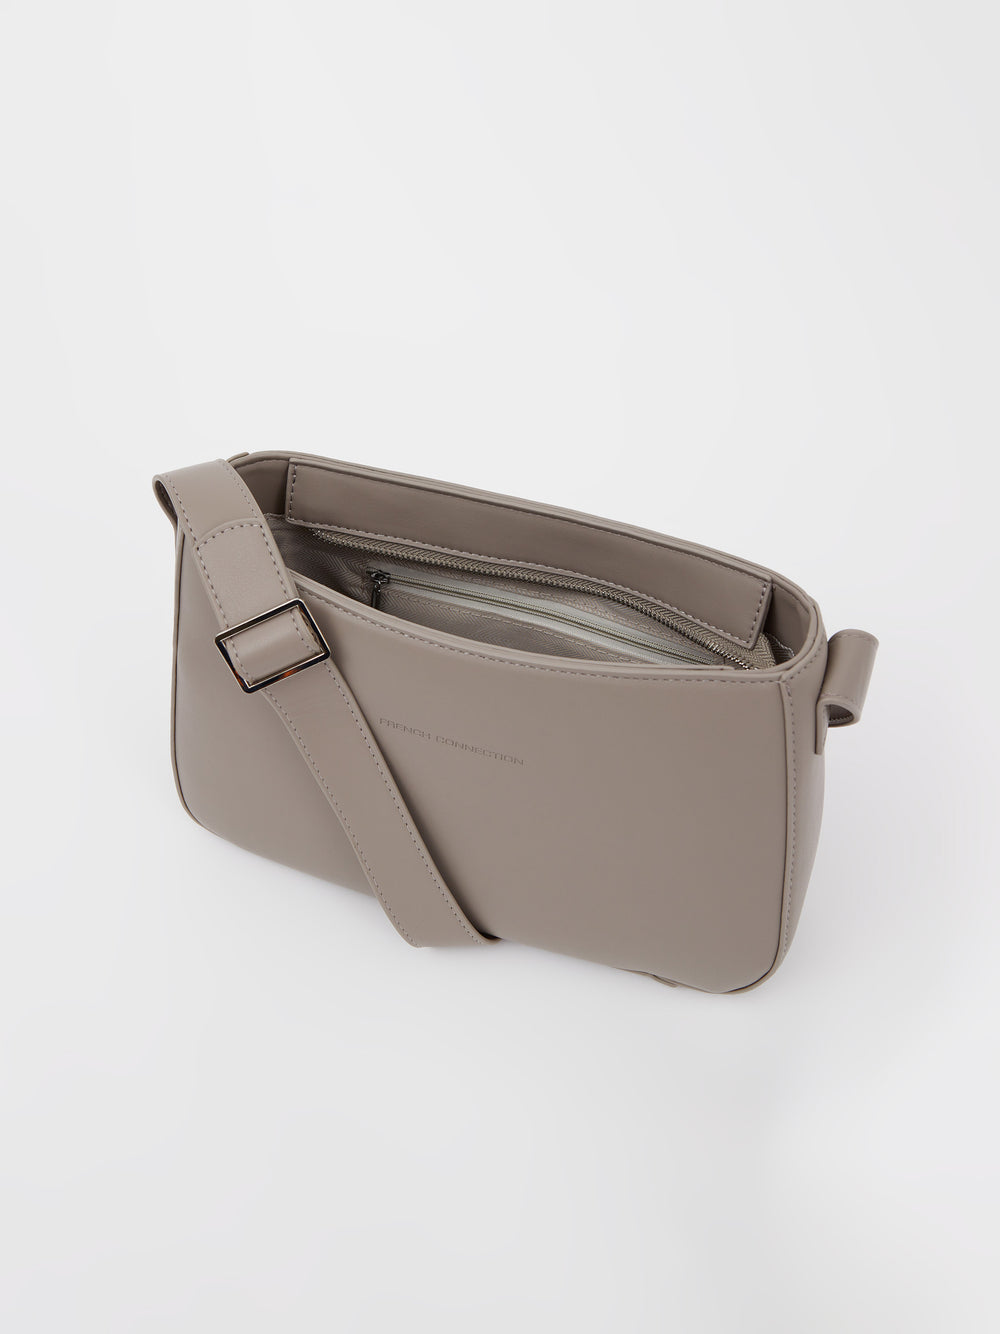 Grab Bag Taupe | French Connection UK